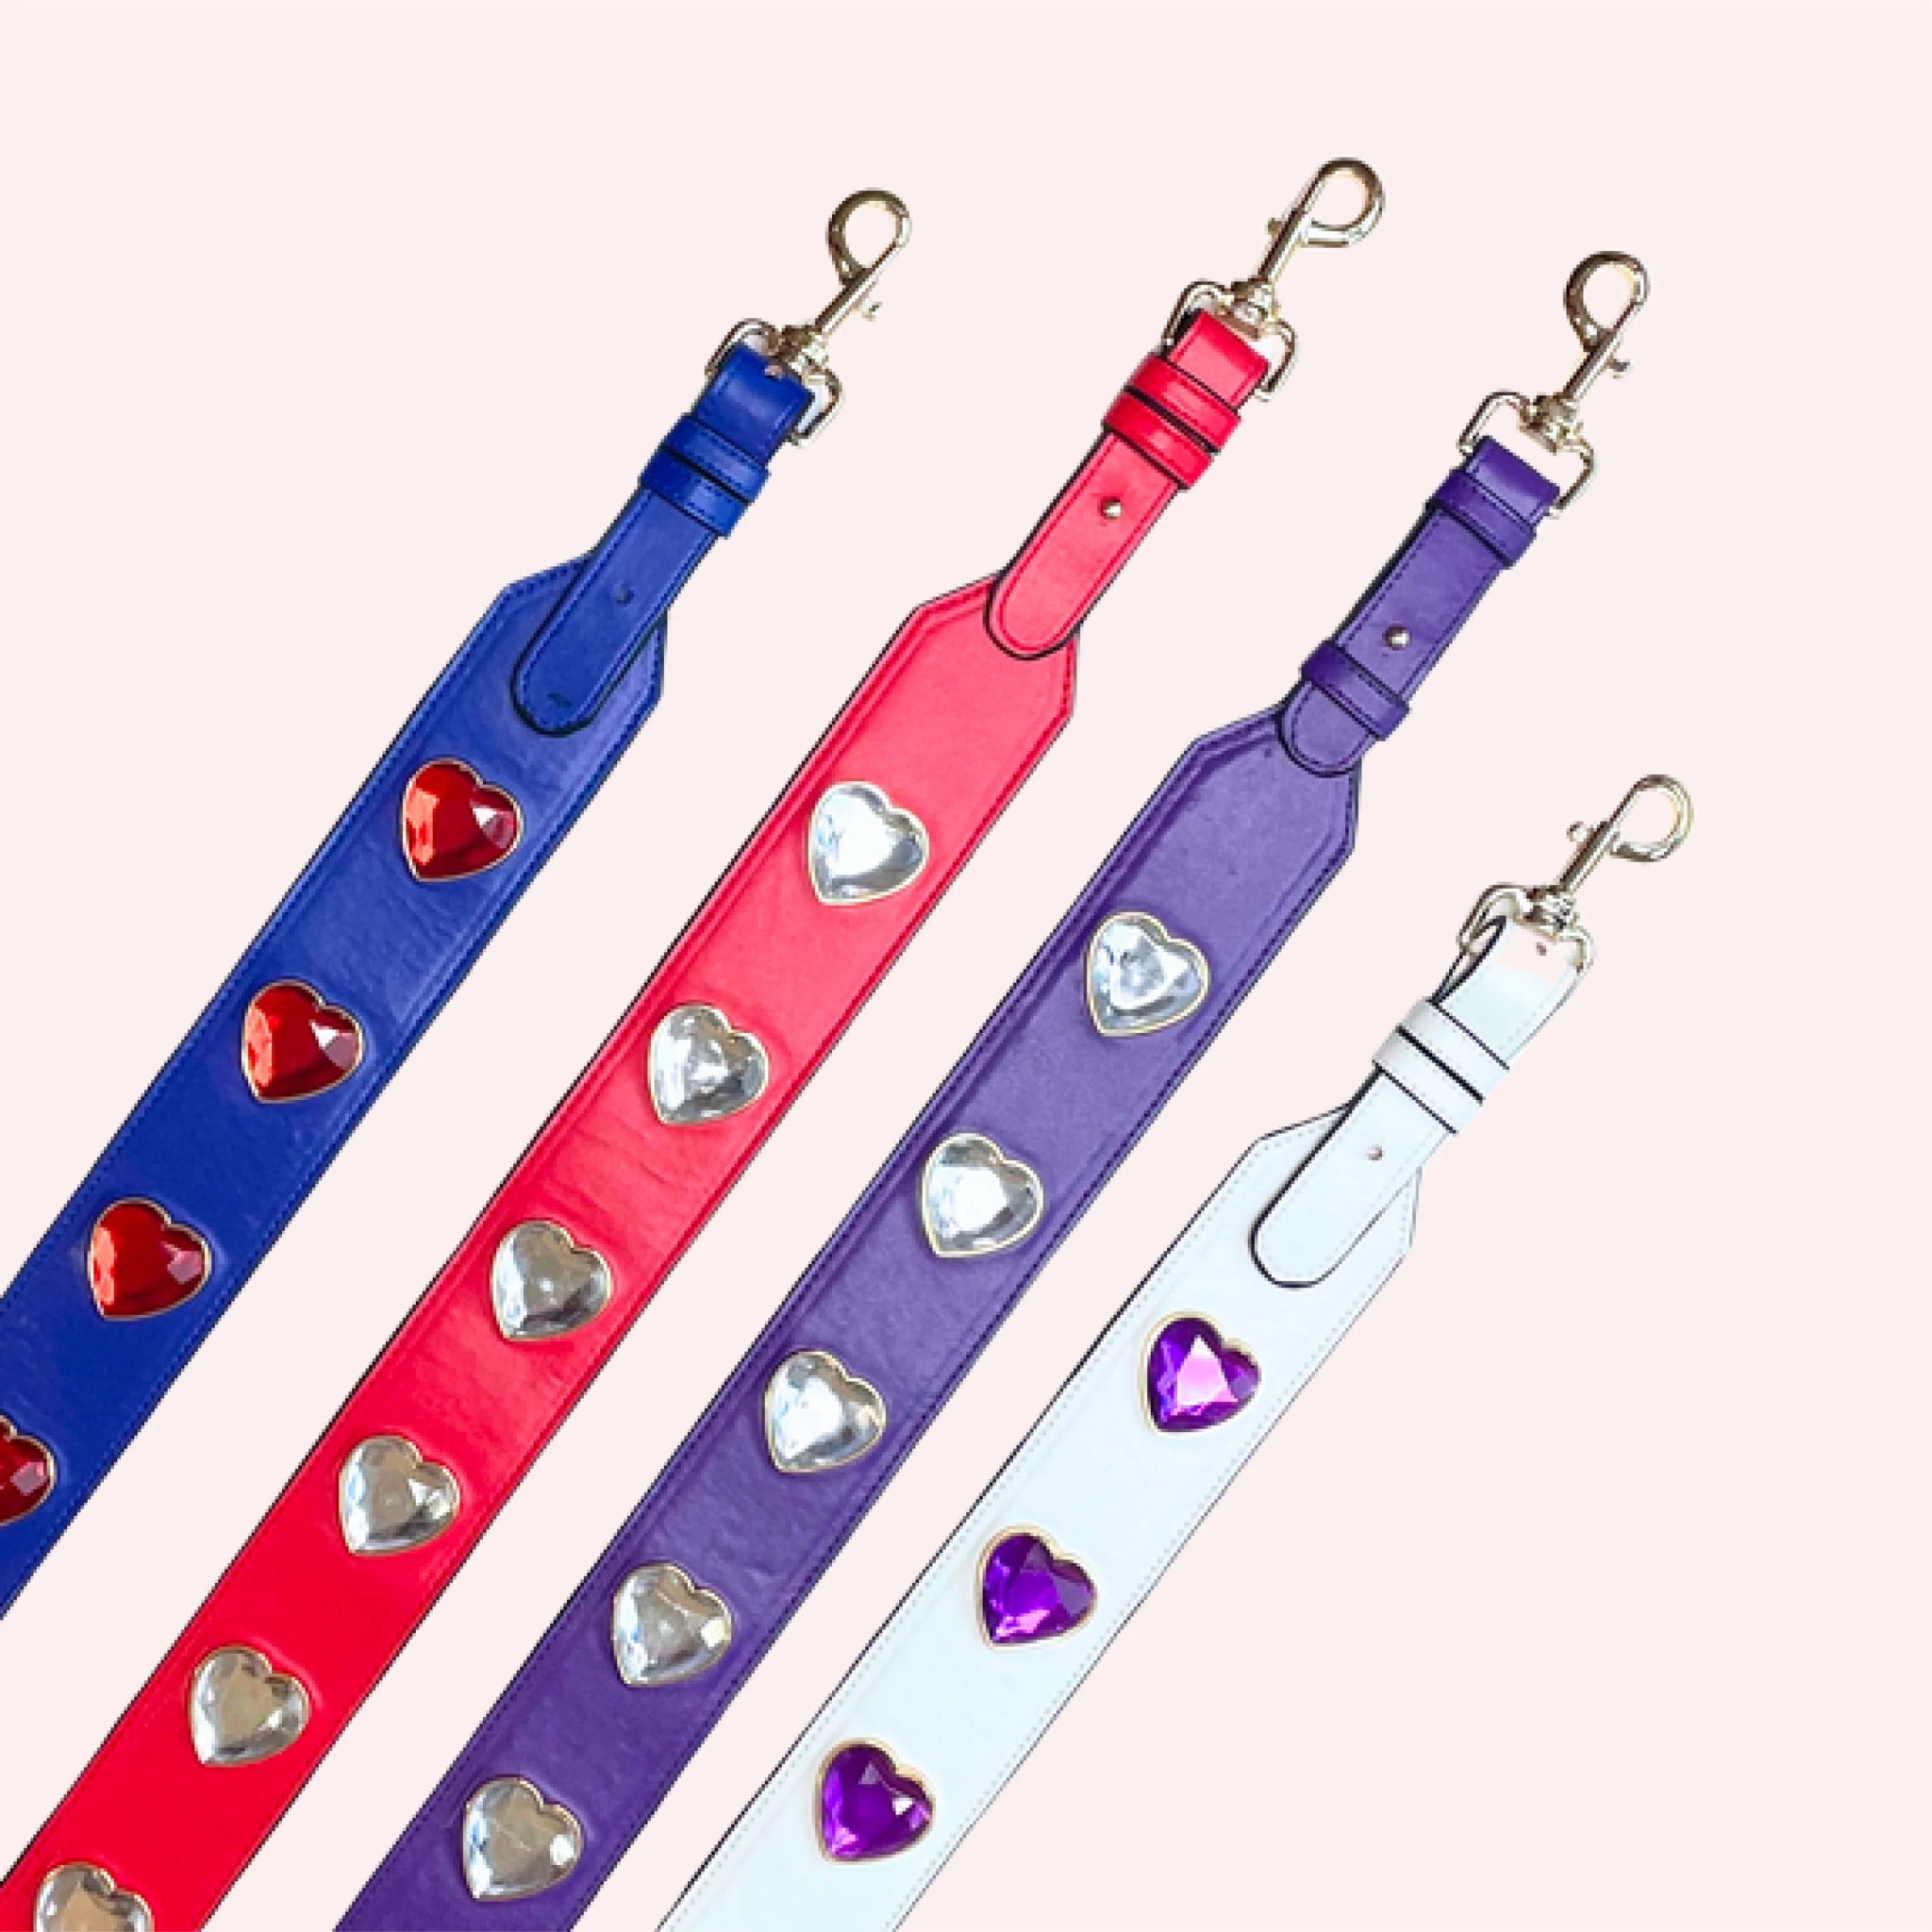 Crystal Heart Bag Strap Blue With Red + Clear Bag - By Jenna Lee - Color Game